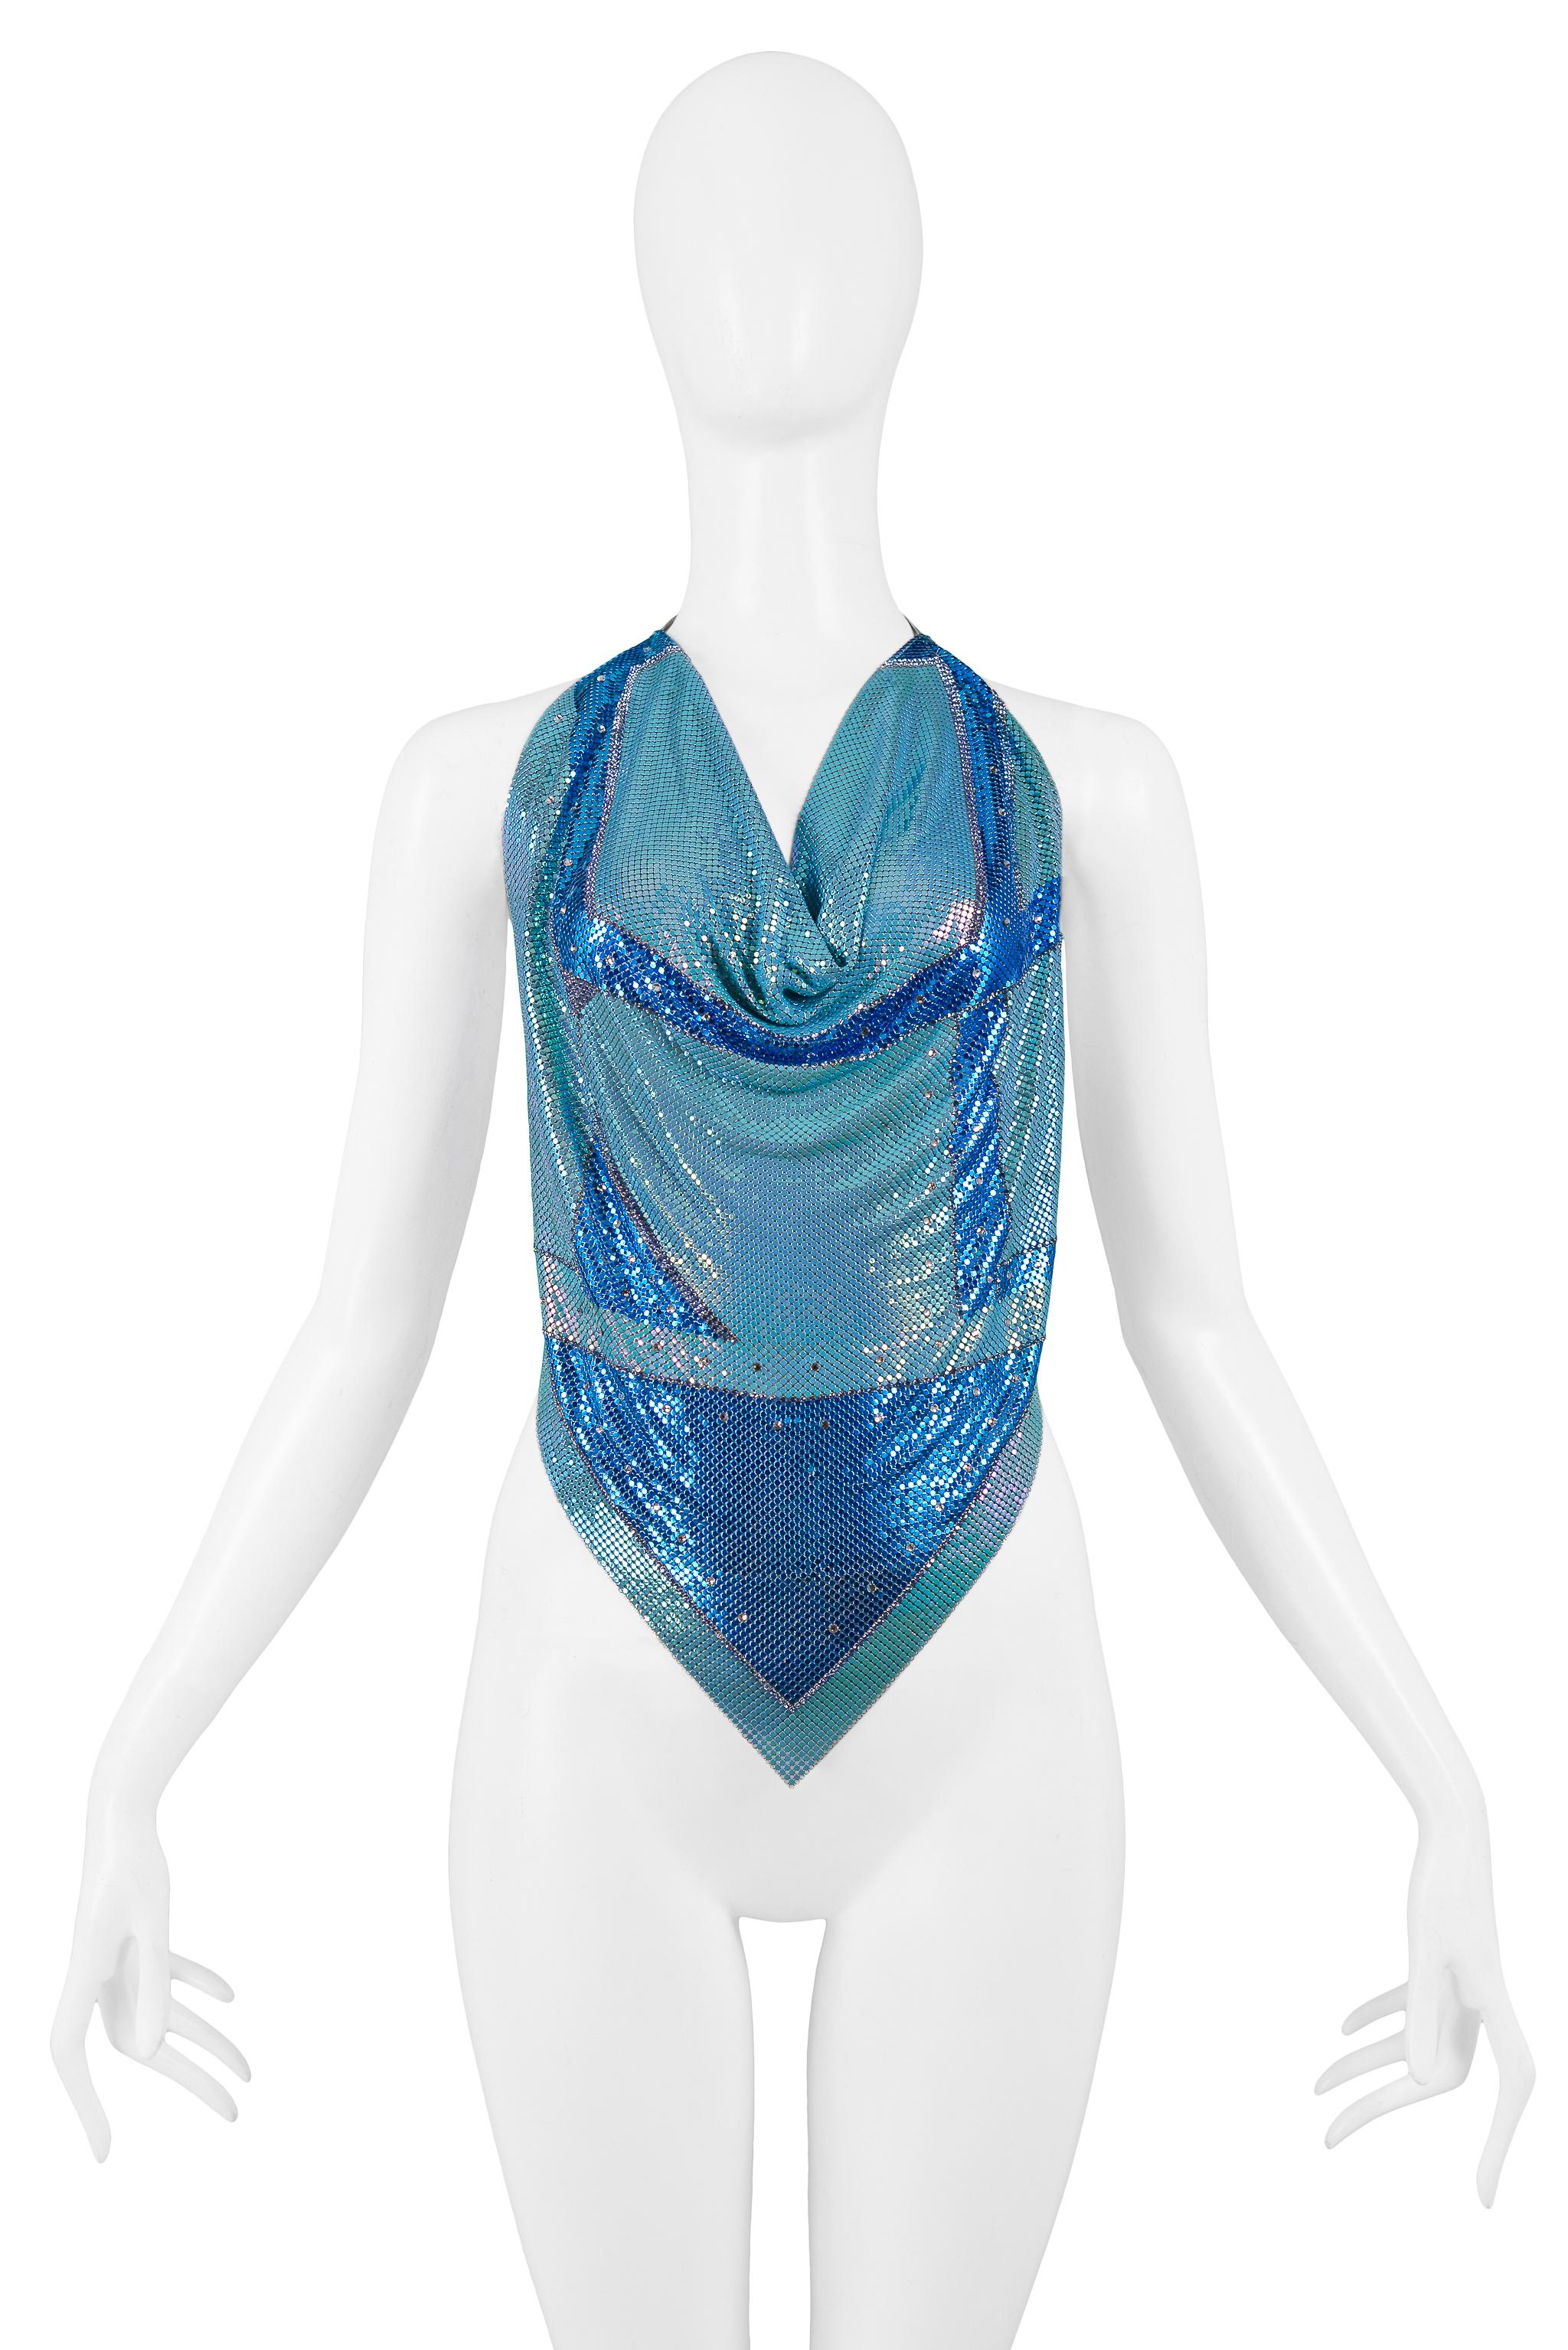 Resurrection Vintage is excited to offer a vintage Anthony Ferrara handmade turquoise and blue chainmail metal halter top with leather straps, rhinestones, and diamond front hem. The cowl neckline is adjustable and can be worn low or high. Circa